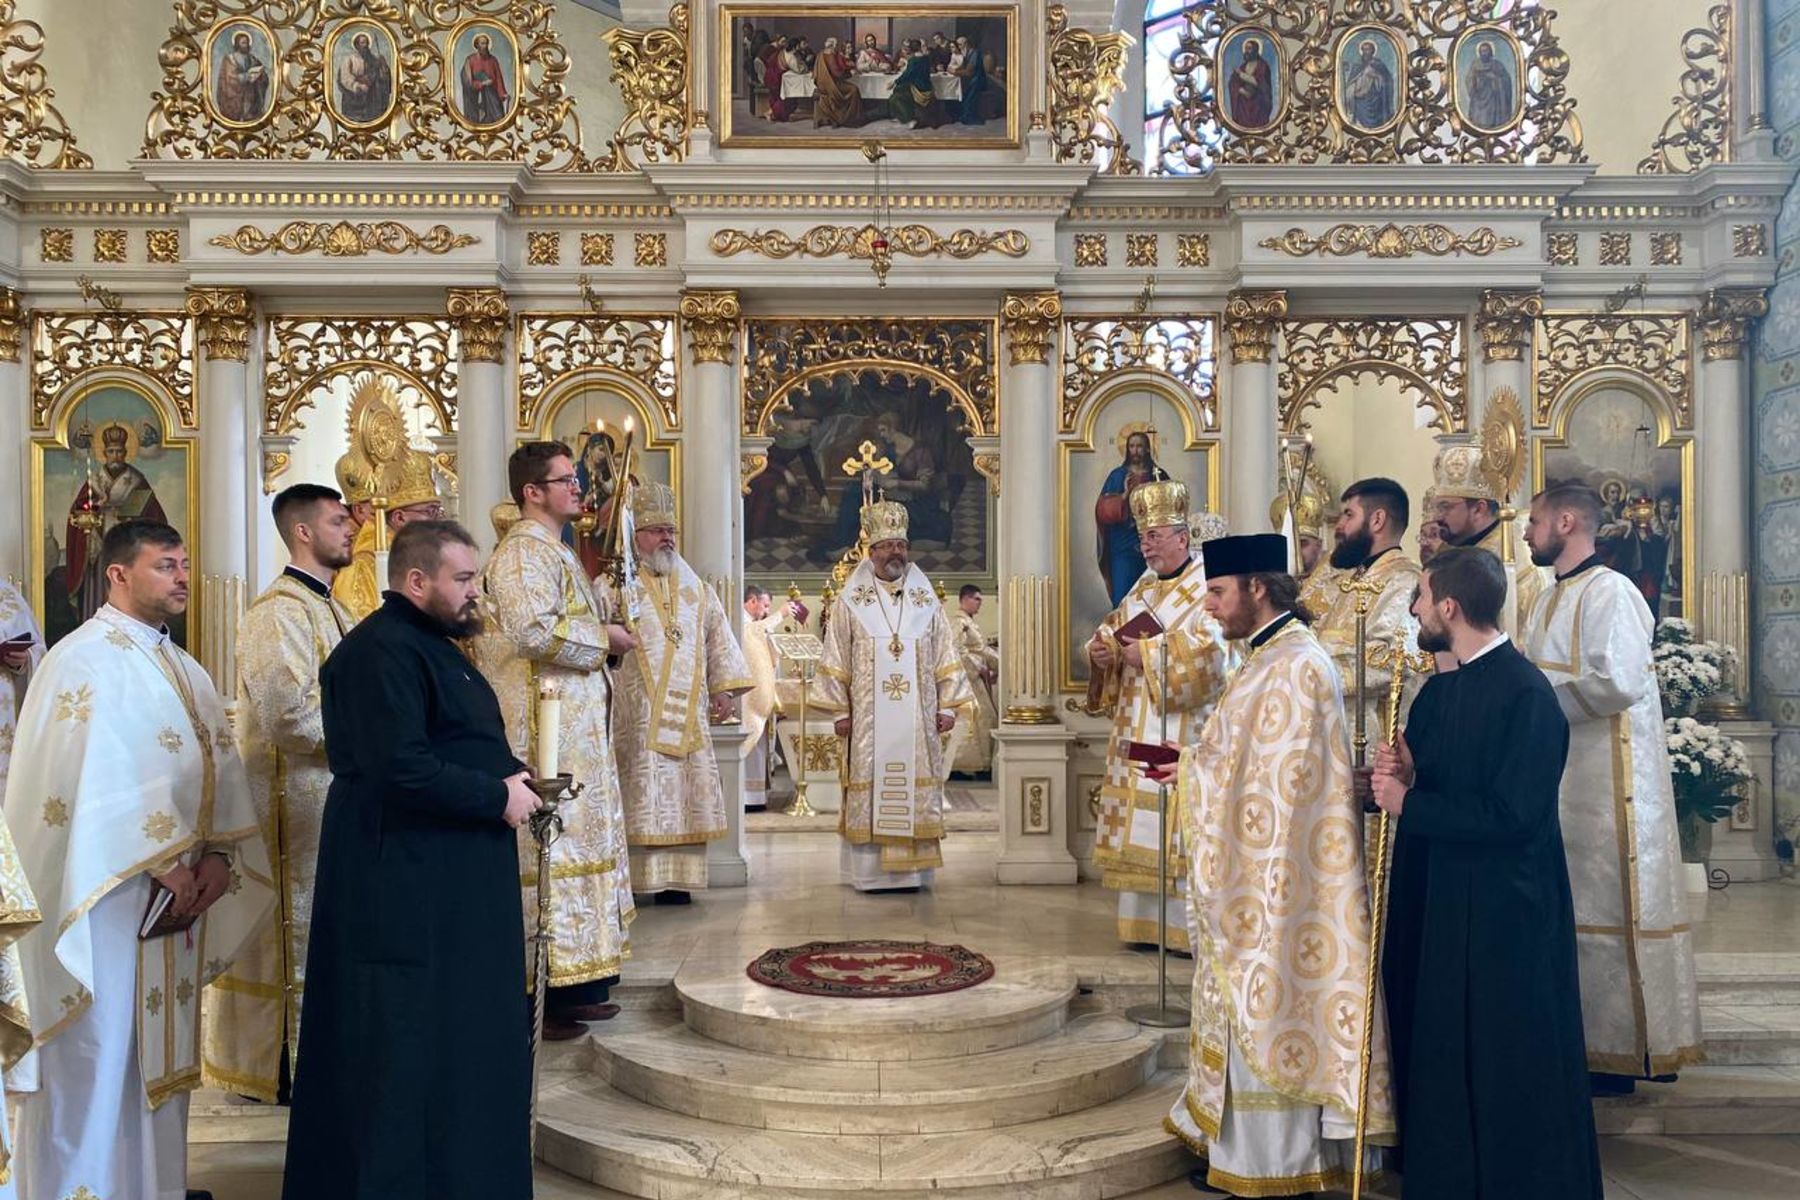 Let Us Live the Time Allotted by God with Dignity as Children of God: His Beatitude Sviatoslav in Kosice